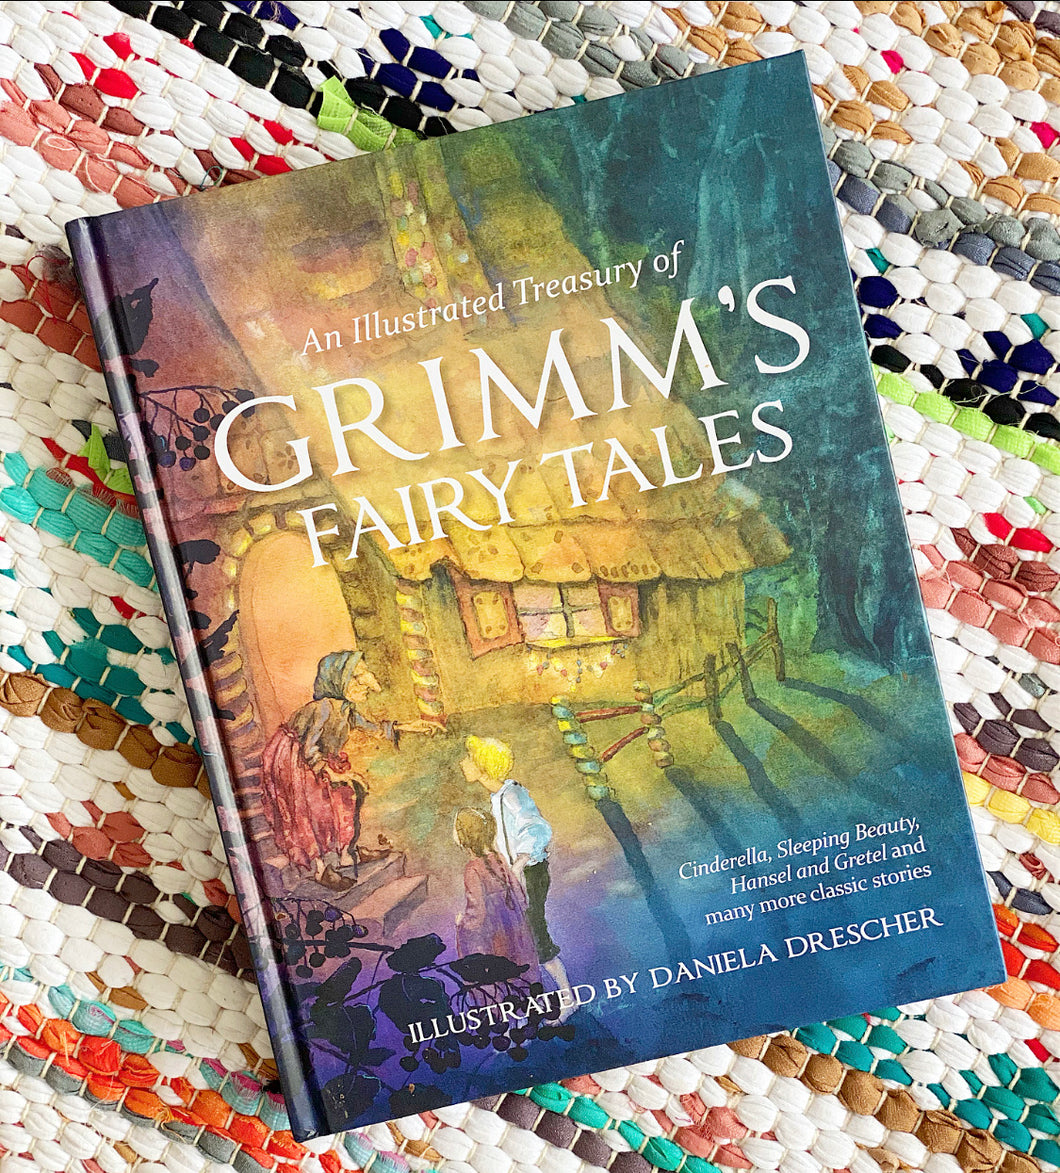 An Illustrated Treasury of Grimm's Fairy Tales: Cinderella, Sleeping Beauty, Hansel and Gretel and Many More Classic Stories The Brothers Grimm | (Author)  Daniela Drescher (Illustrator)